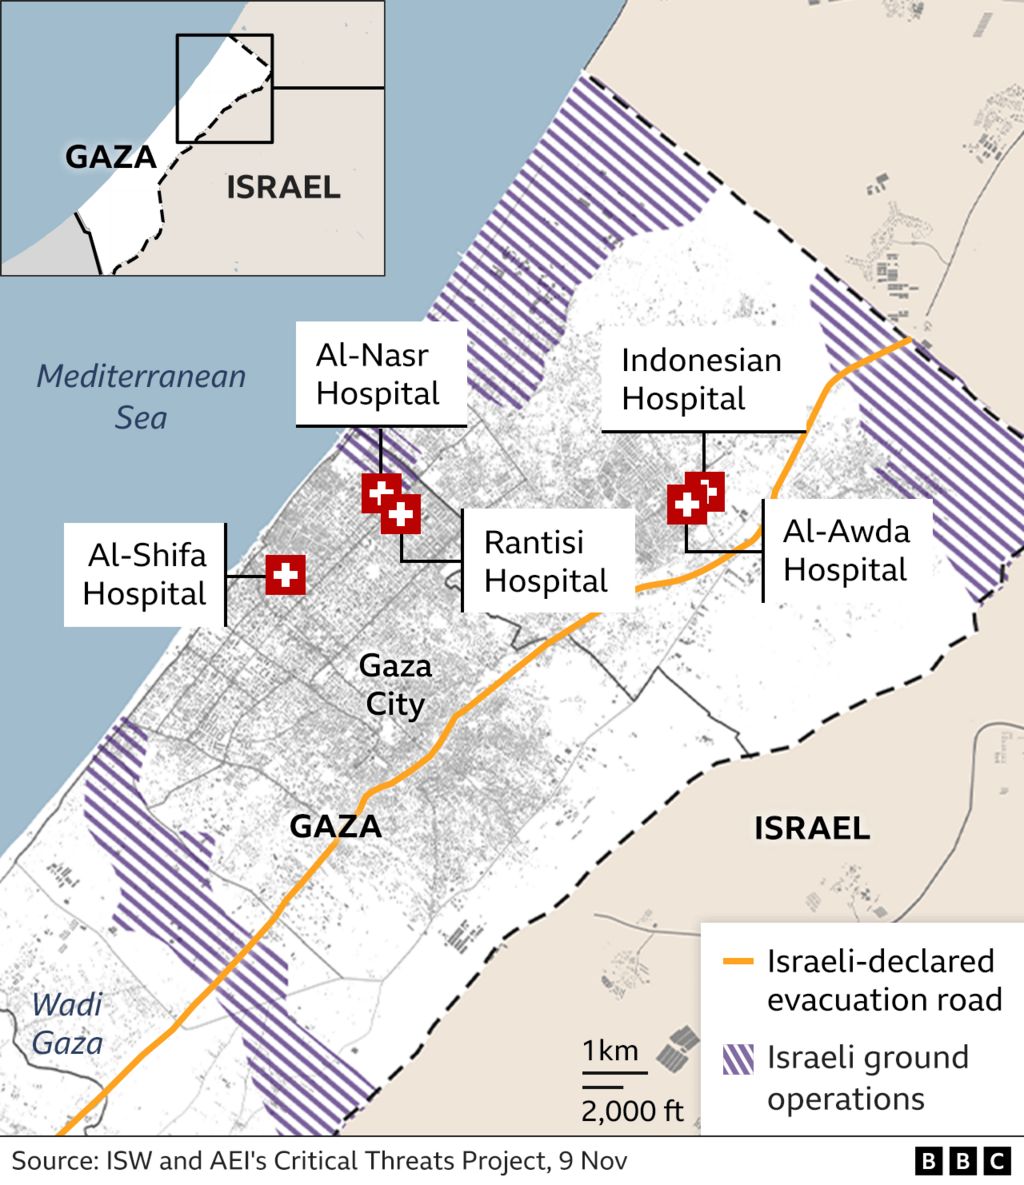 Map showing the main hospitals in northern Gaza. Reports say Israeli forces are operating in the area and there have been explosions inside or near them. Israel has warned civilians still in northern Gaza to head south of the Wadi Gaza along the Salah al-Din Road.